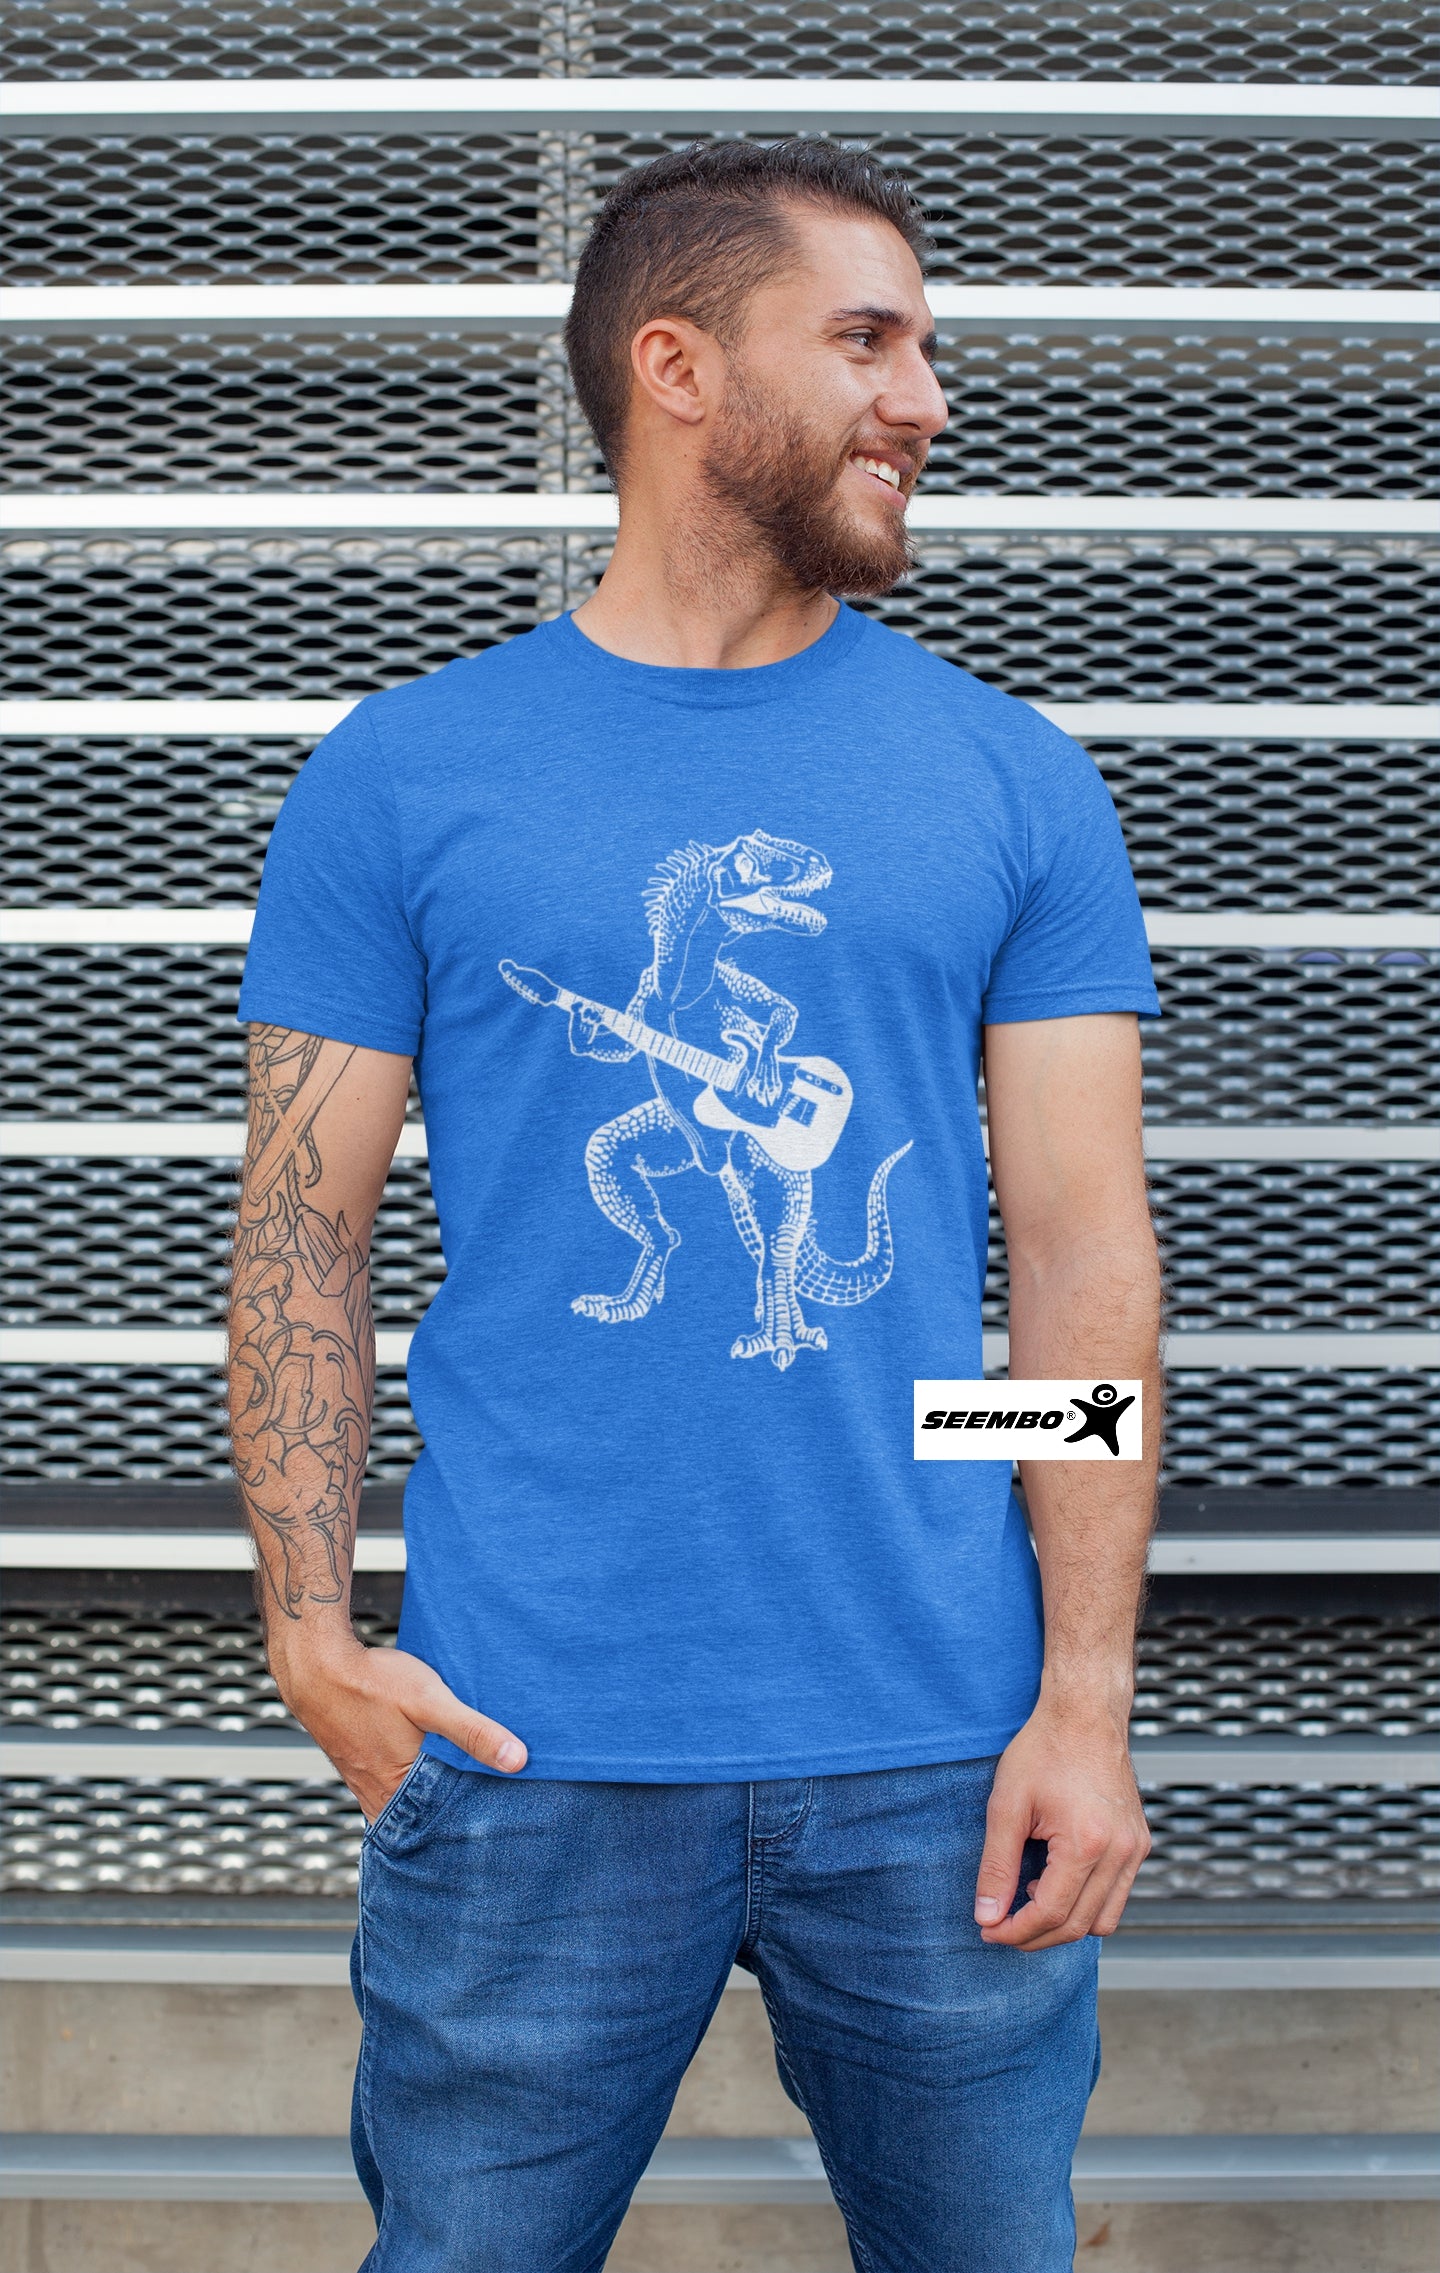 a-man-with-vintage-royal-t-shirt-and-dinosaur-playing-guitar-guitarist-art-on-it